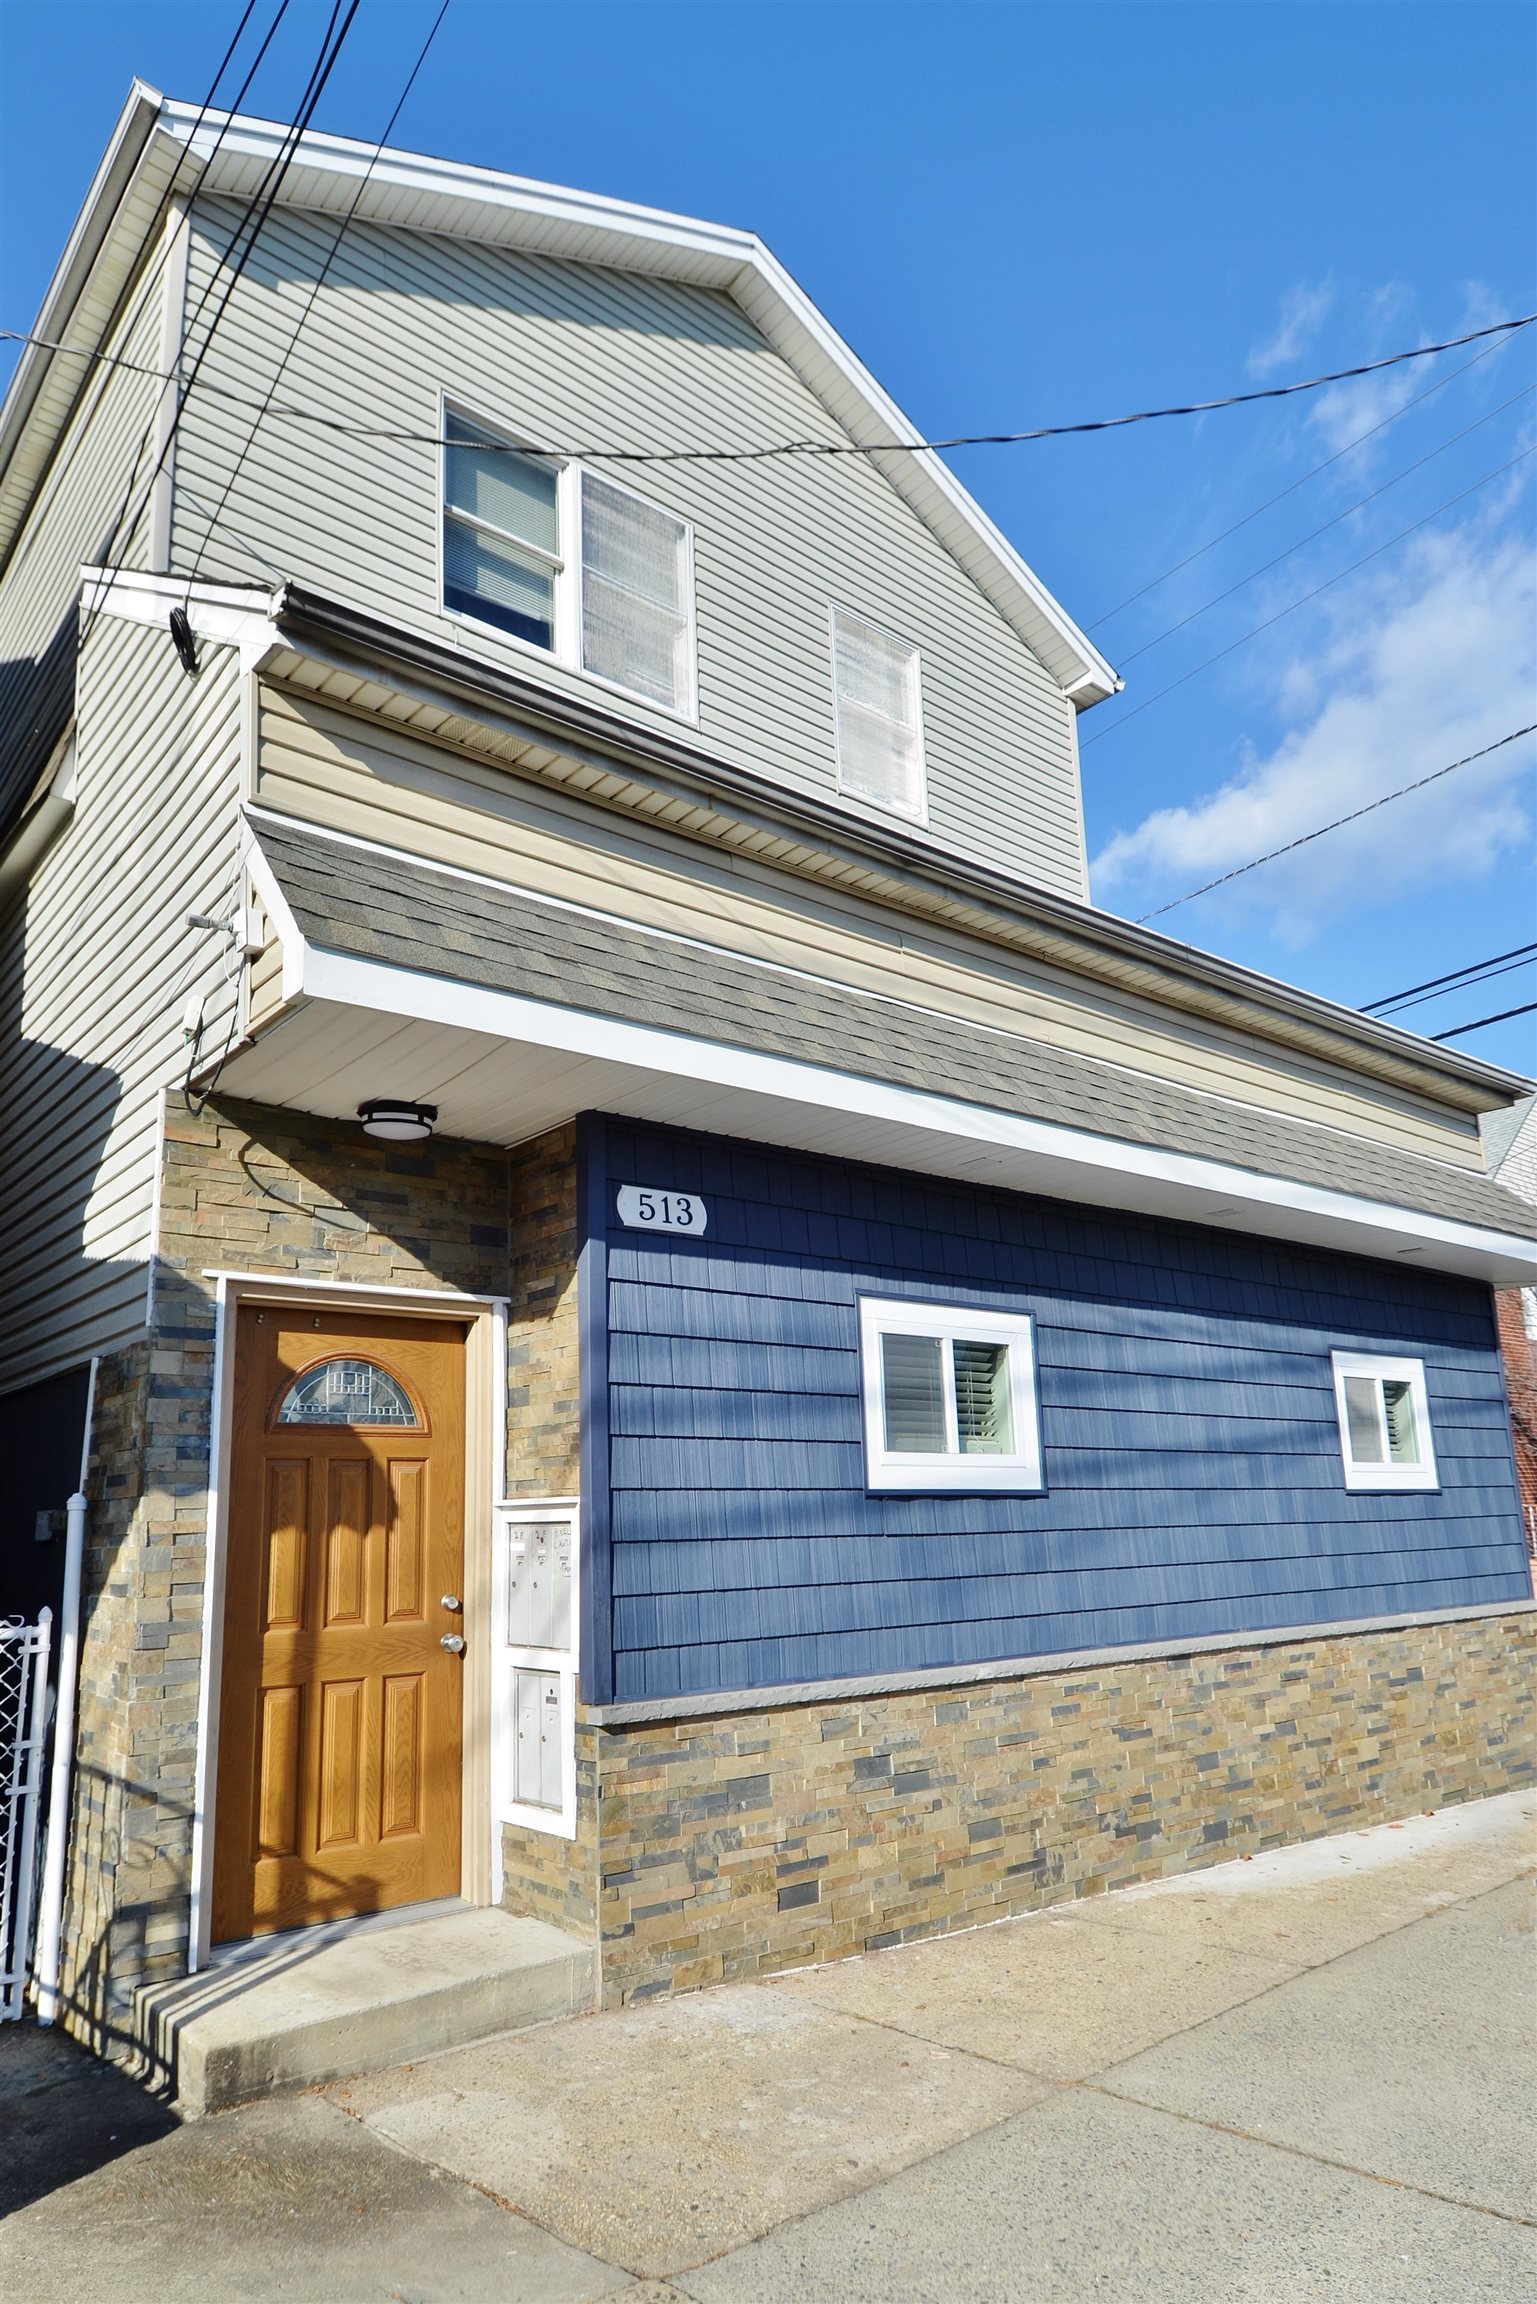 # 230020805 - For Rent in Bayonne NJ